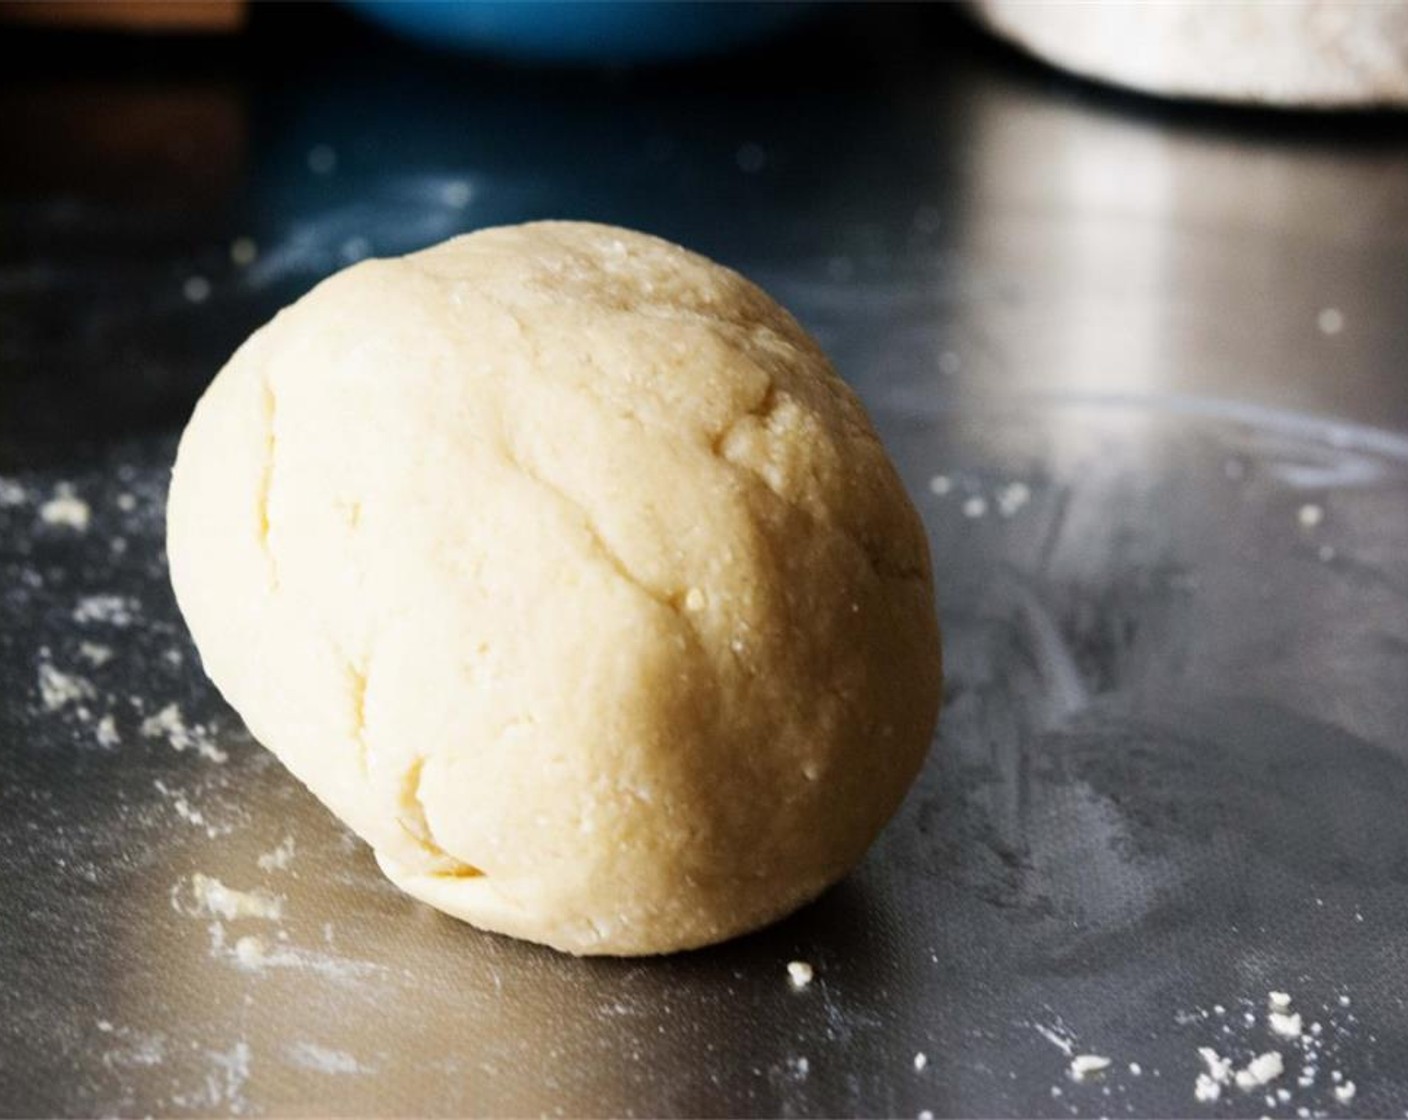 step 7 Mix them until you get a soft, smooth dough. Wrap in plastic wrap and refrigerate for at least 30 minutes.